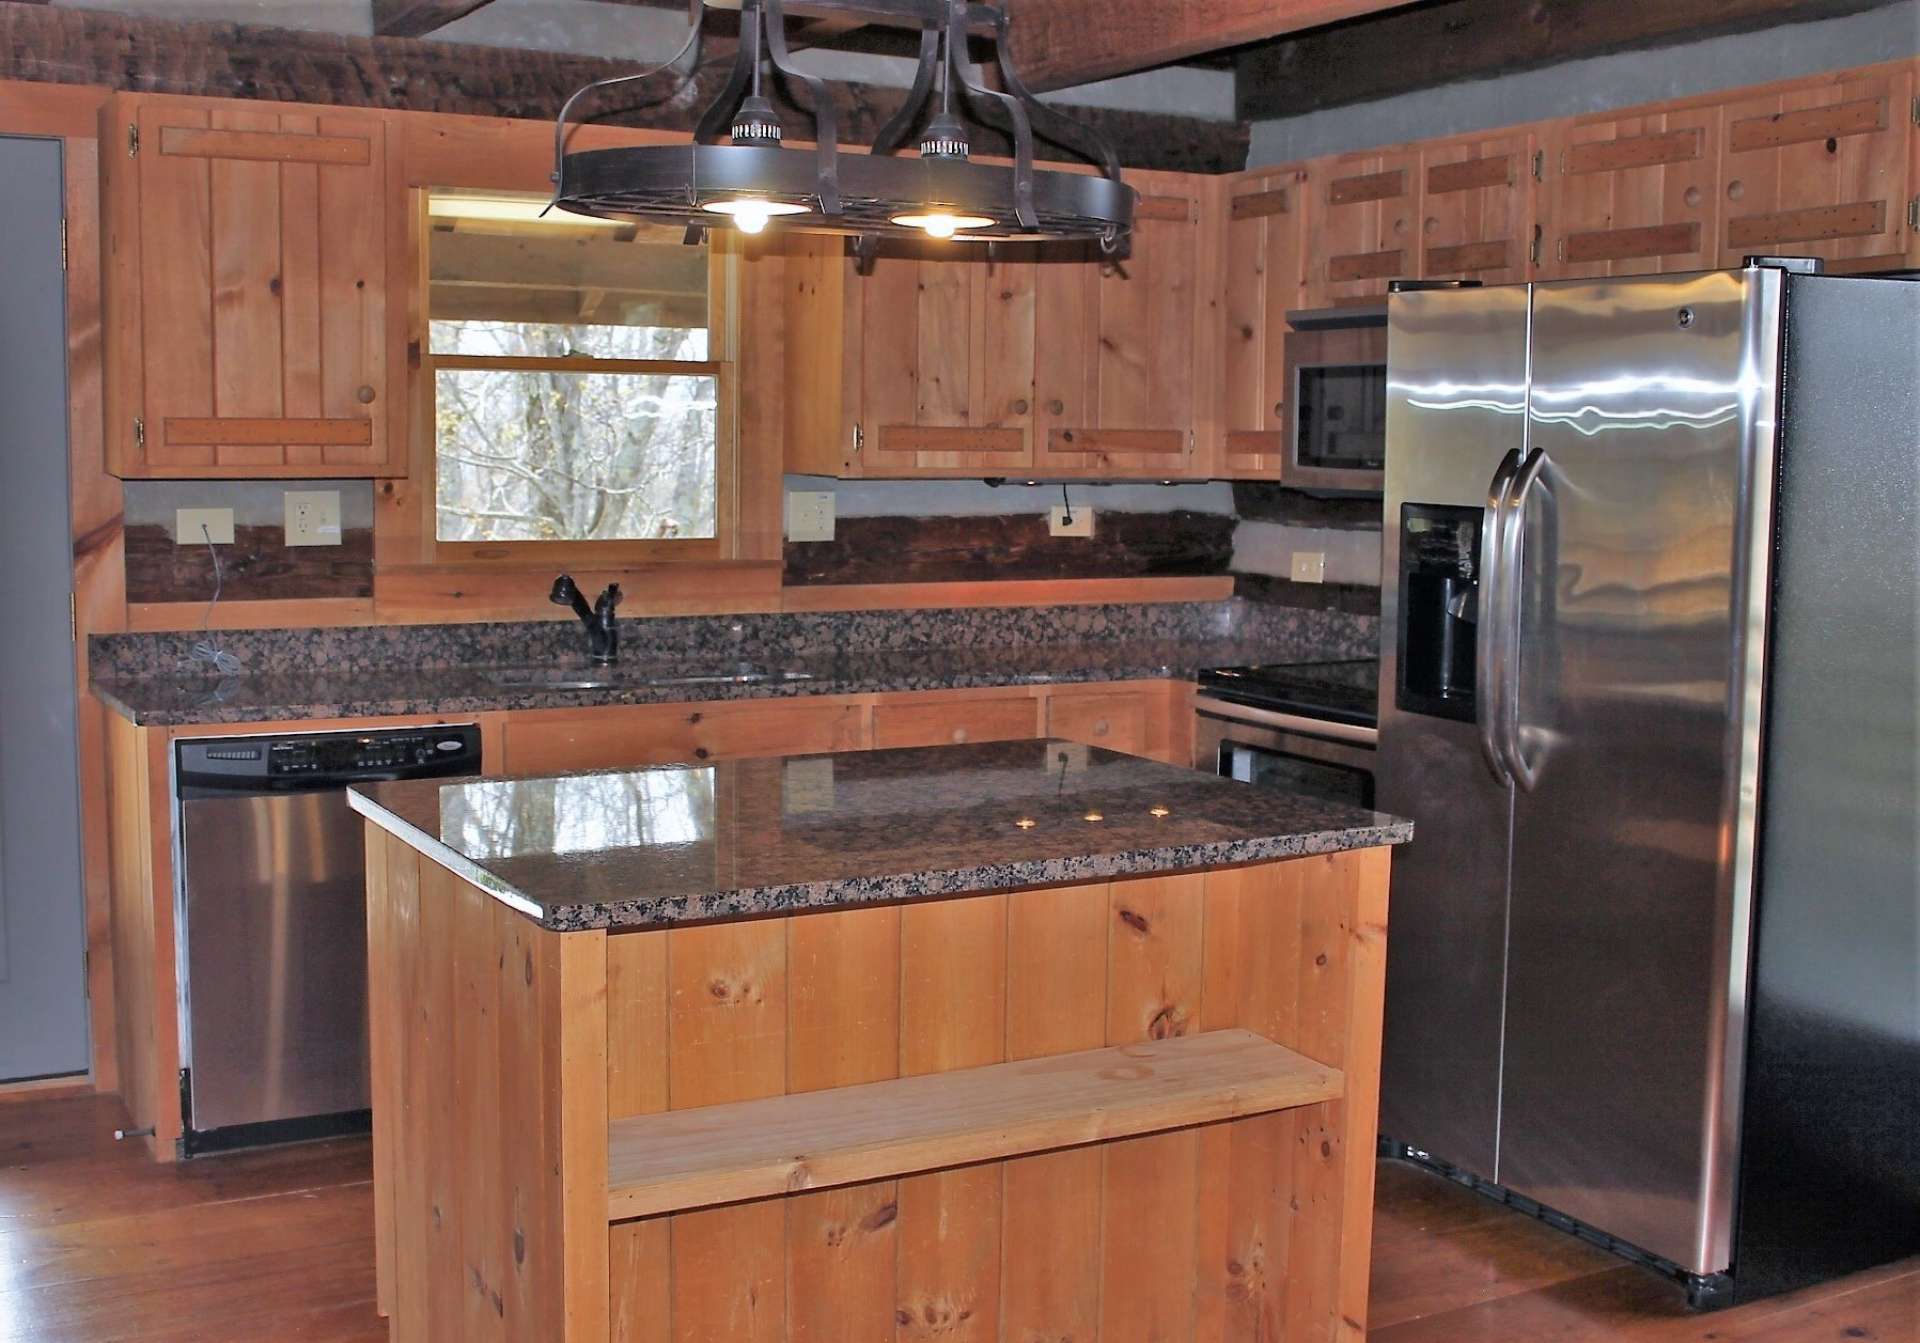 Kitchen is beautifully equipped with stainless appliances, granite counter tops, island and rustic custom cabinets.